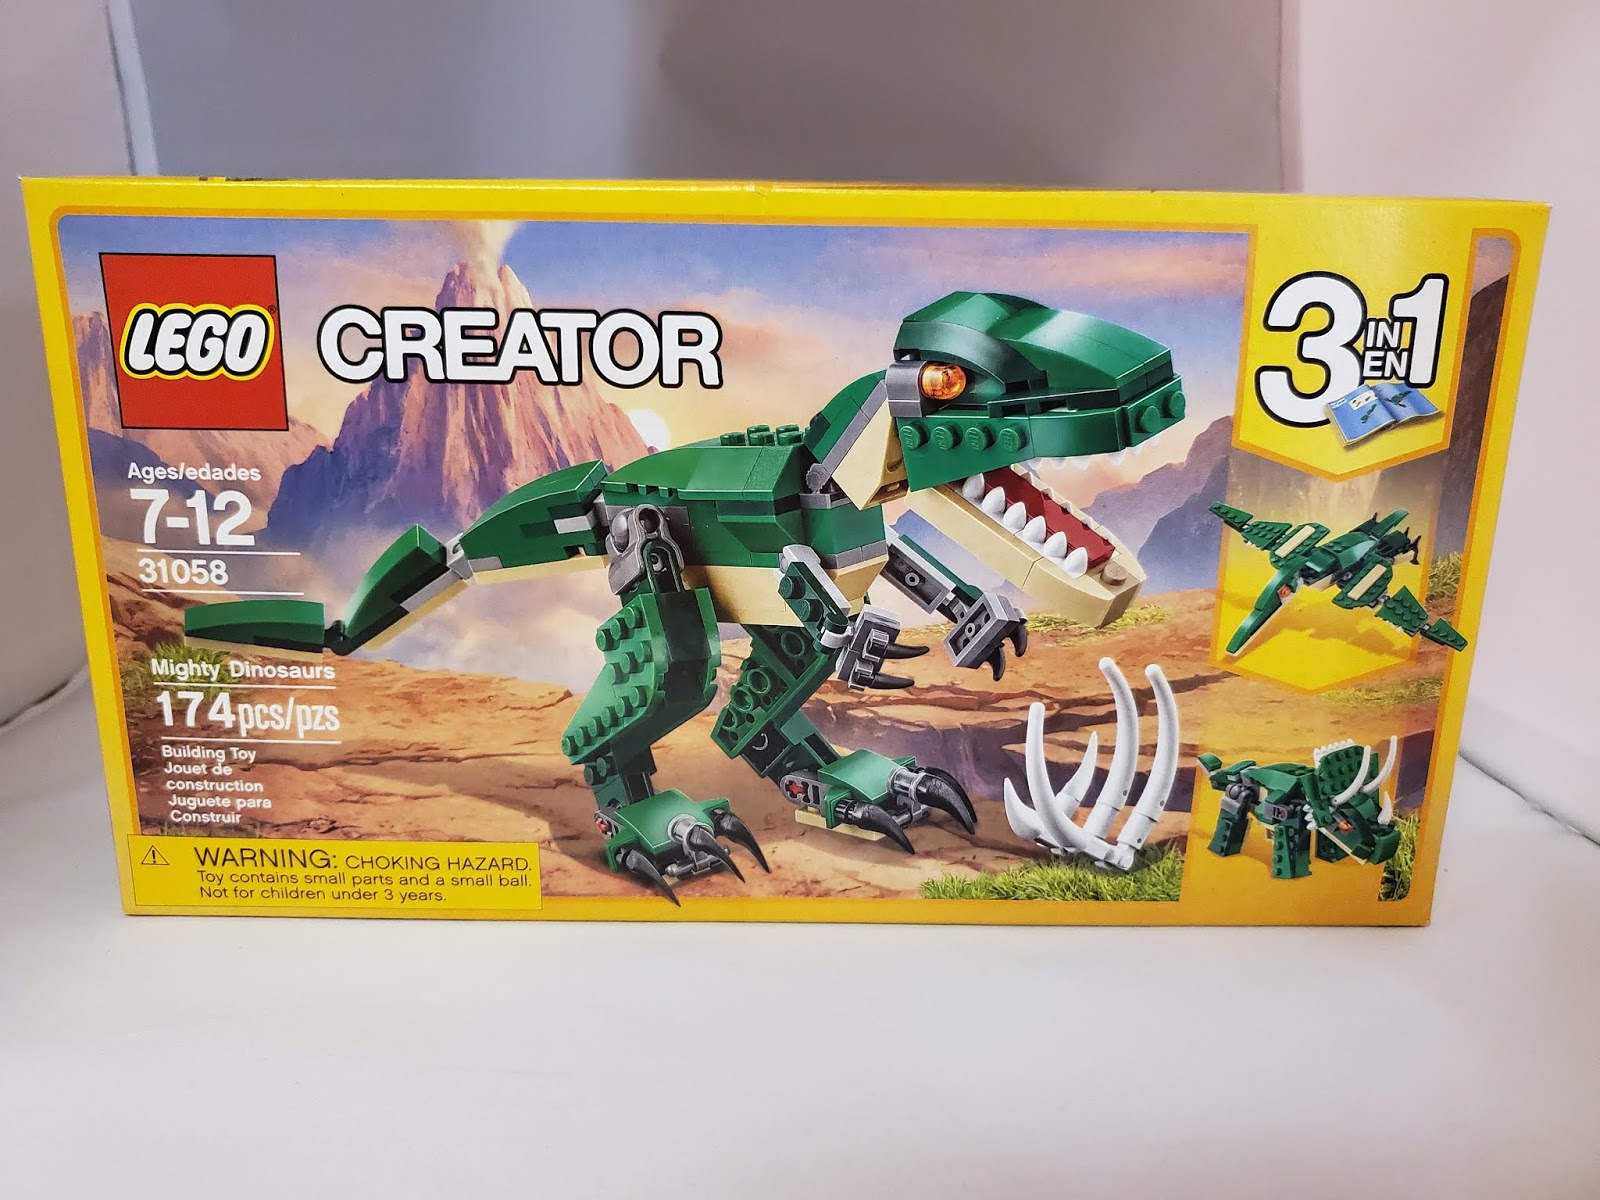 LEGO 31058 Mighty Dinosaurs review